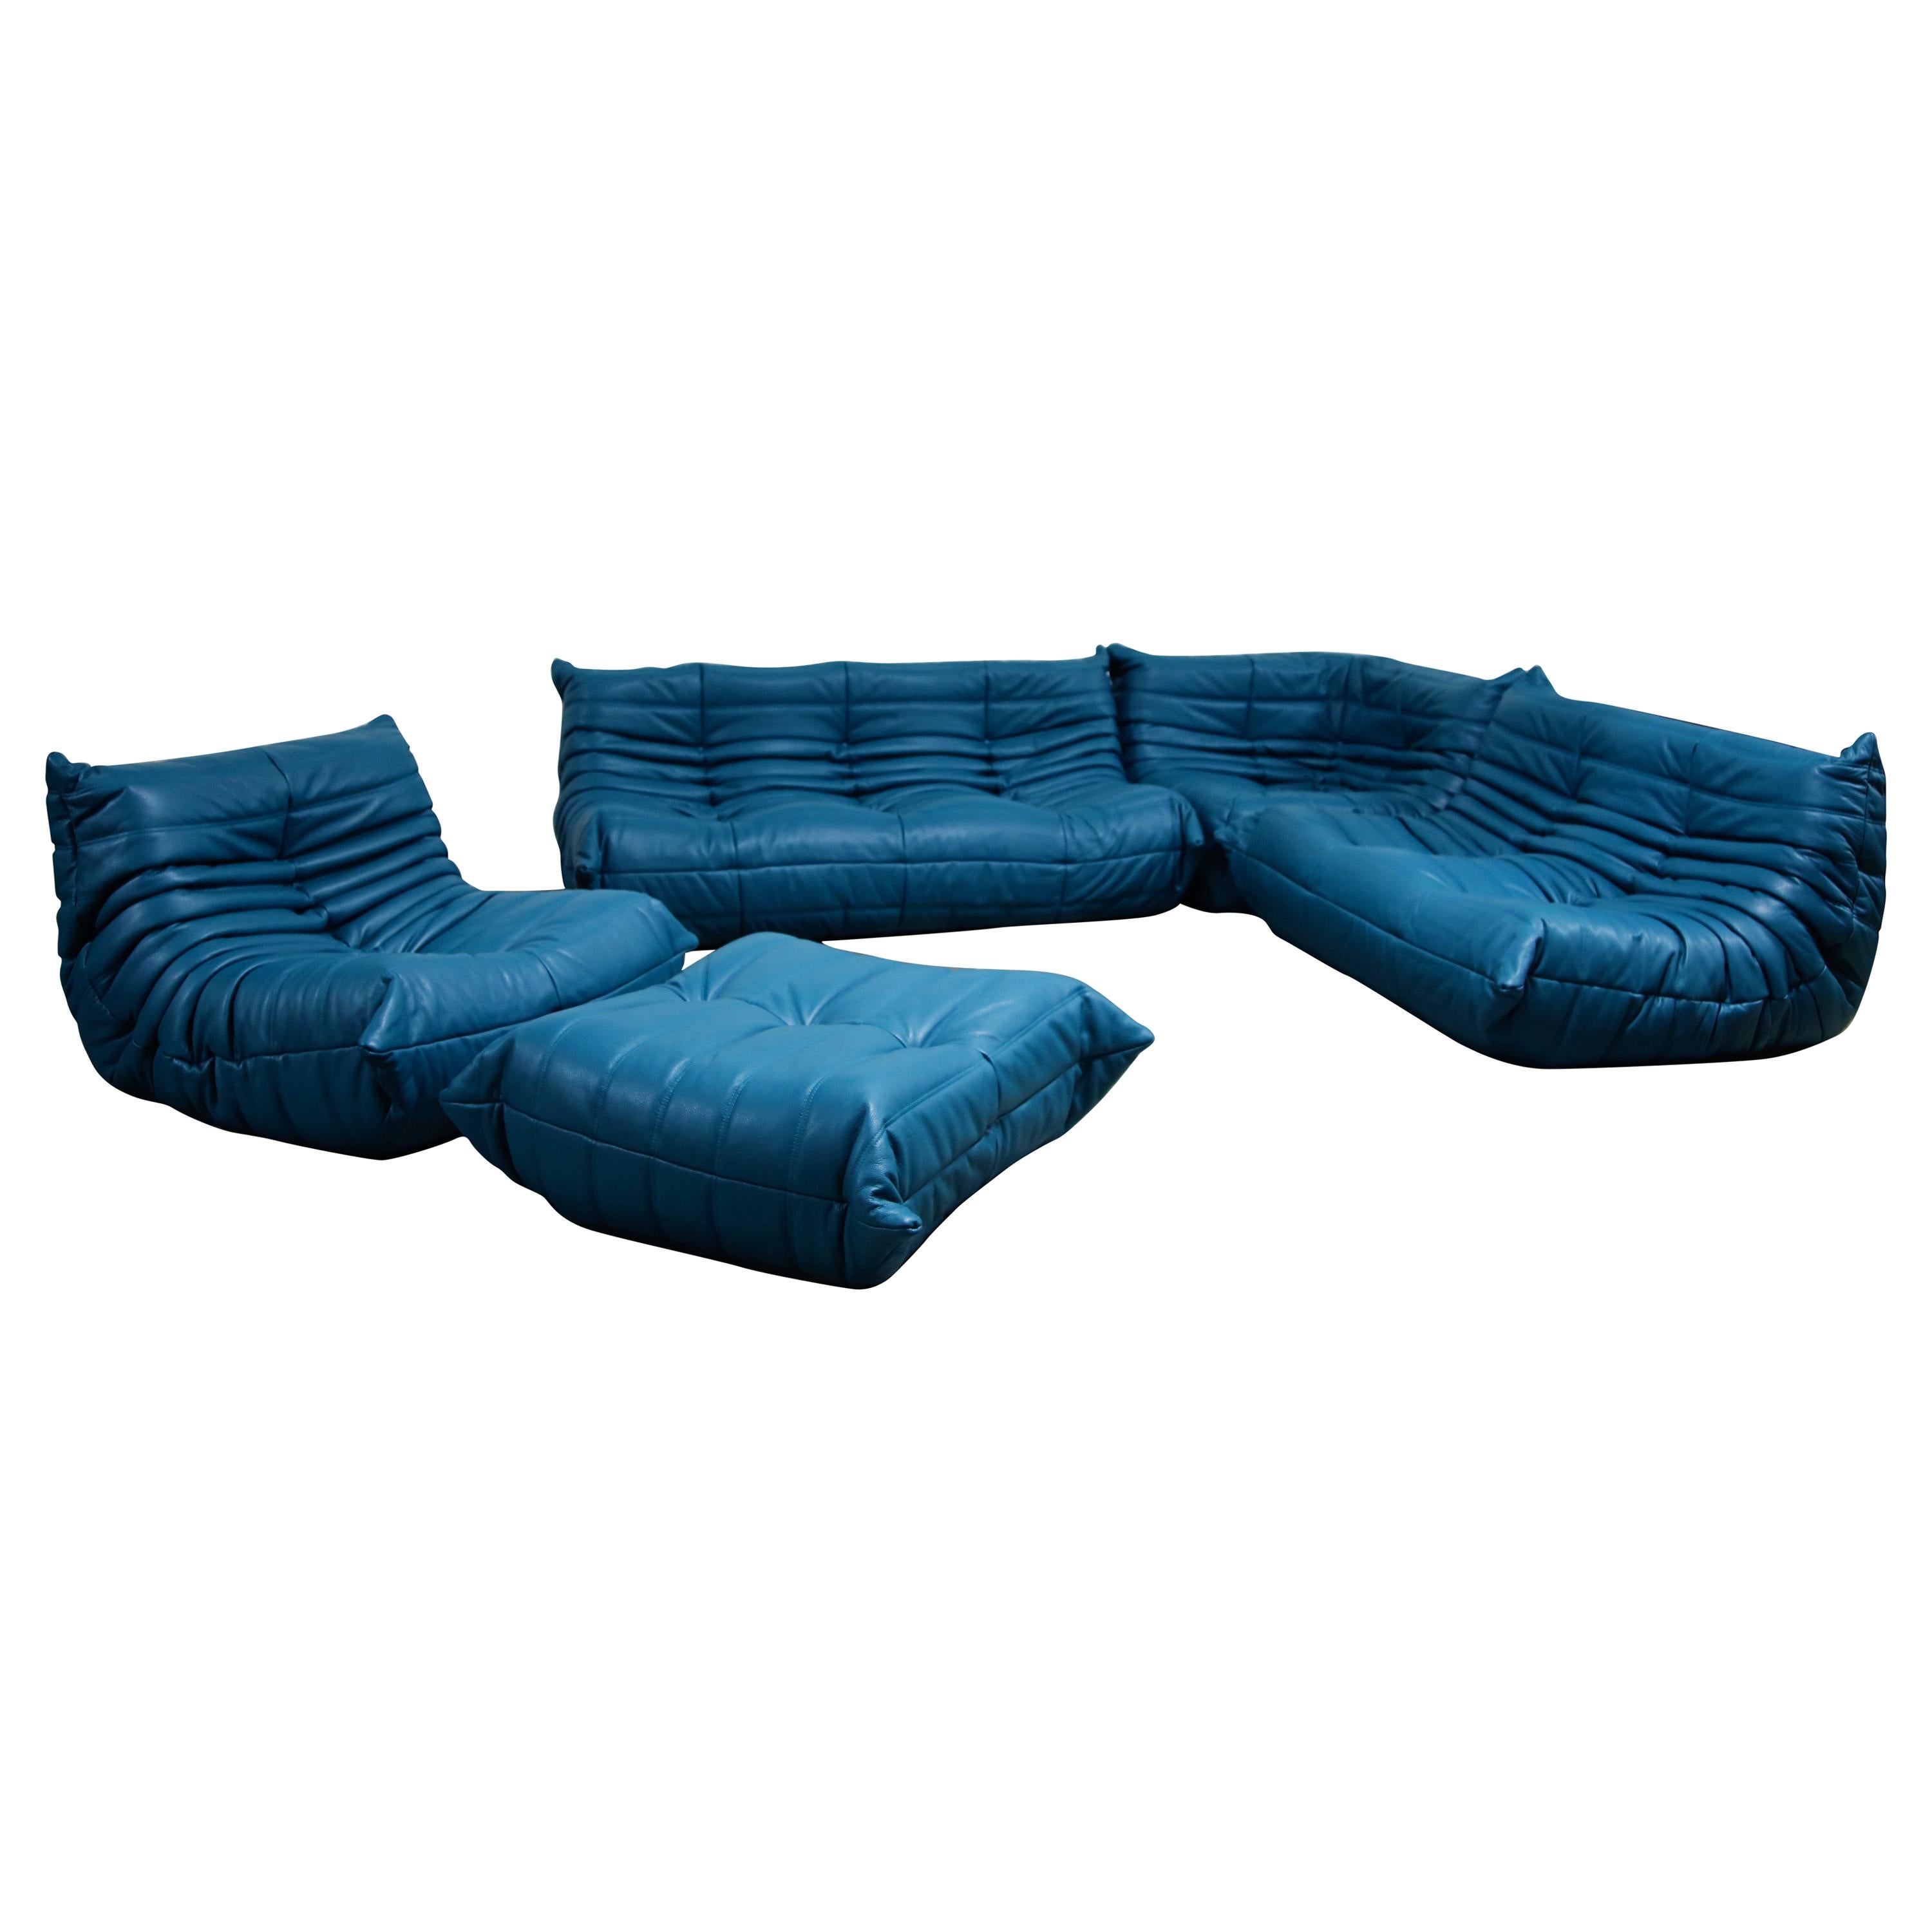 Togo Sectional Five-Piece Set by Michel Ducaroy for Ligne Roset in Blue Leather